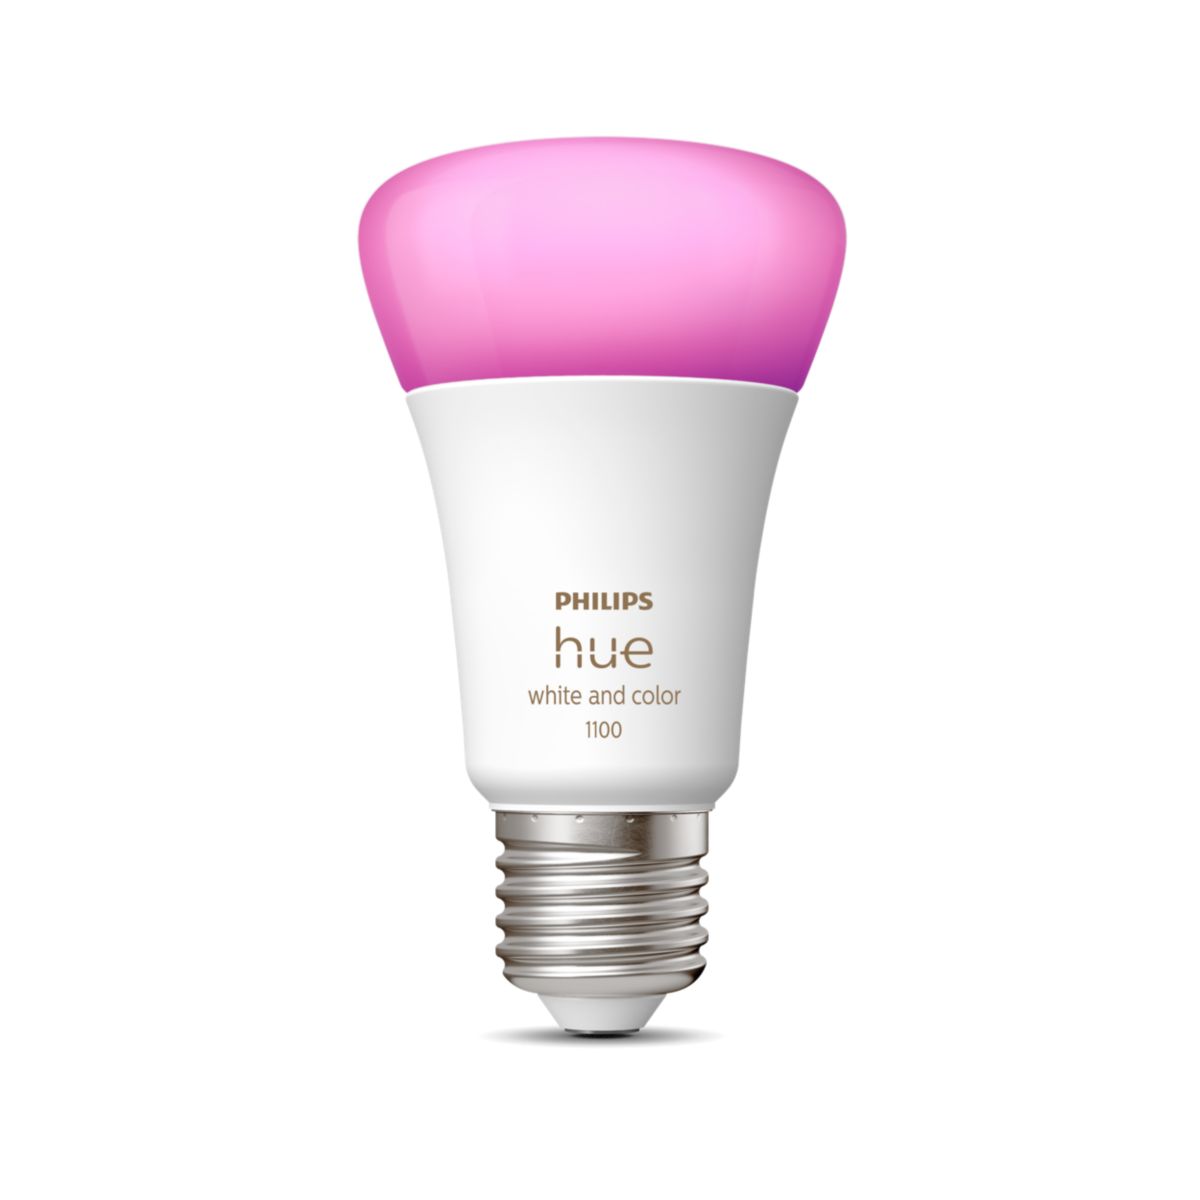 Philips Hue E27 white and color ambiance 1100lm